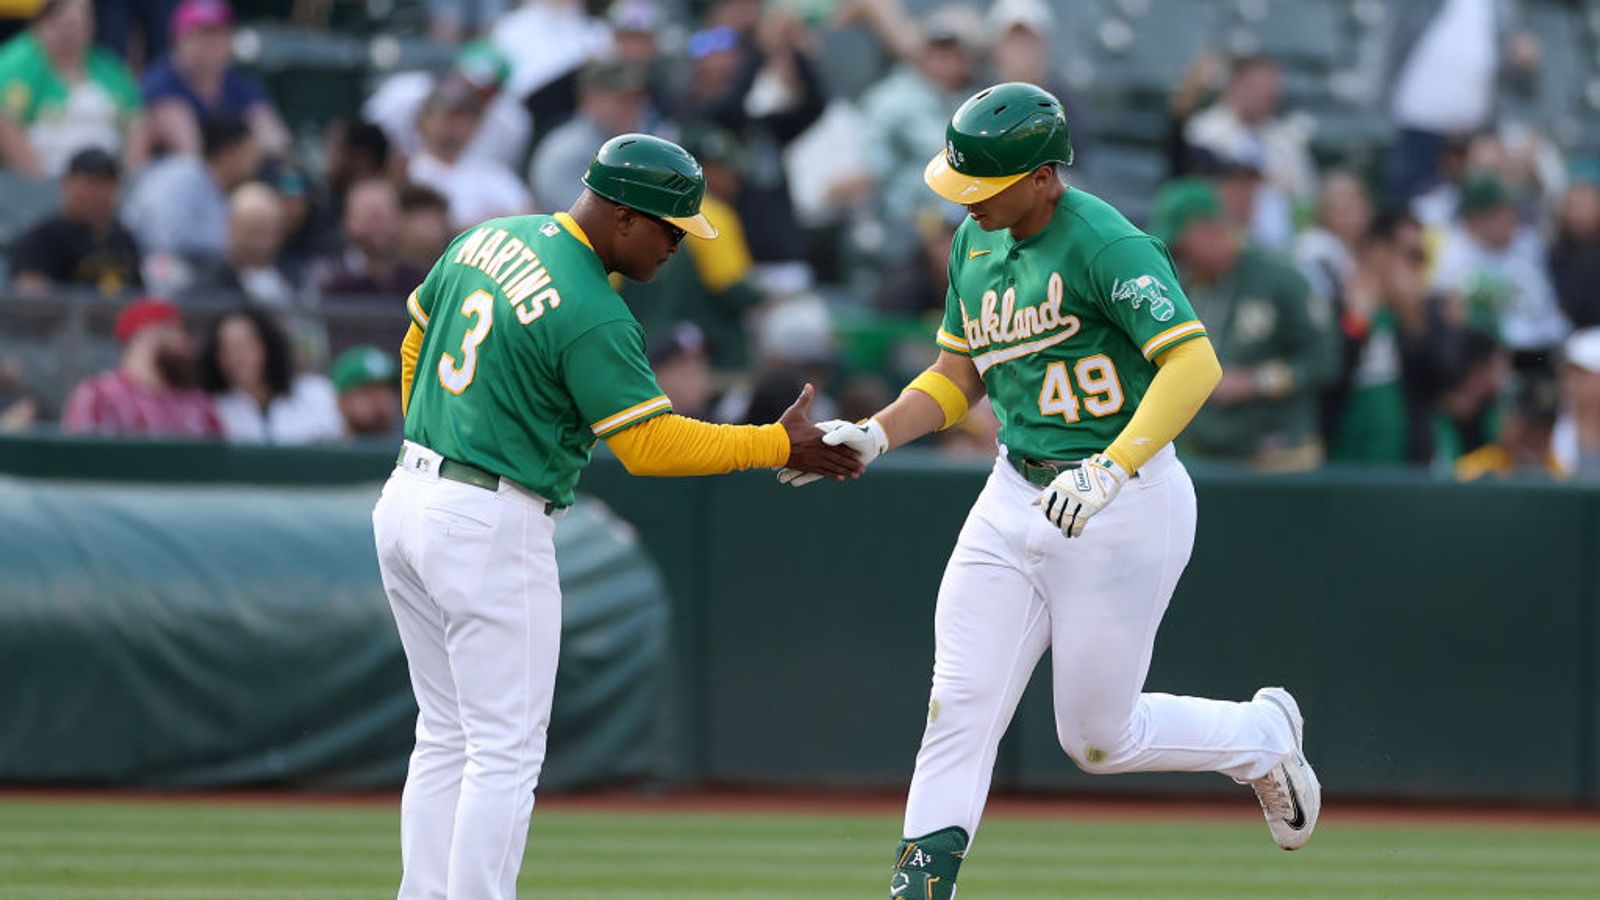 BSJ Game Report: Athletics 3, Red Sox 0 - Oakland holds Boston to 5 hits in  shutout win